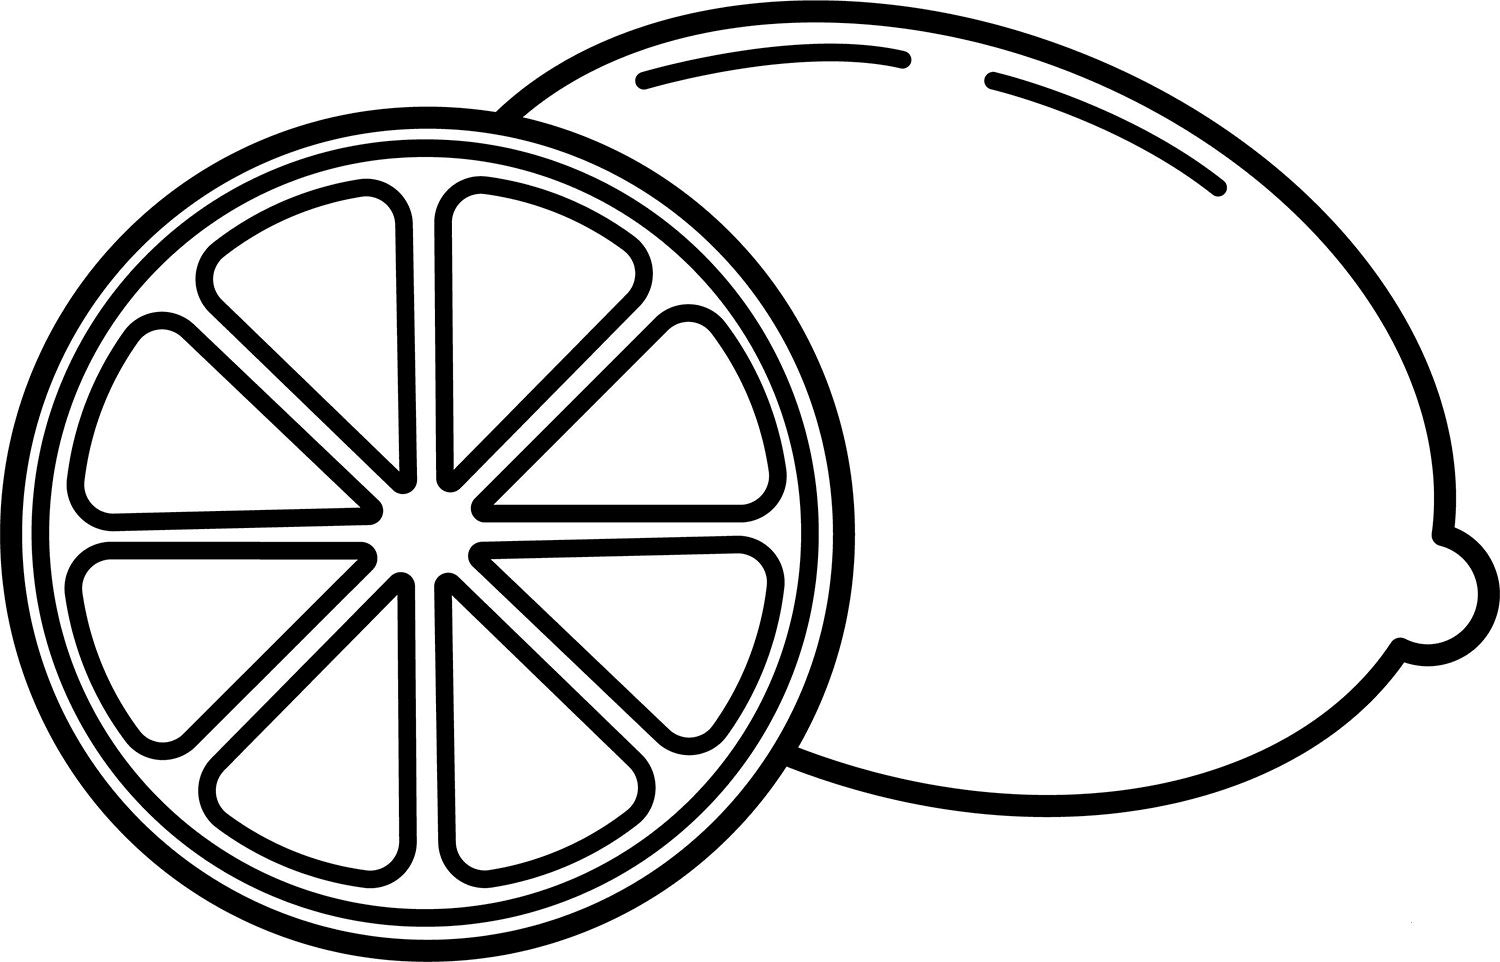 Lime coloring page - ColouringPages